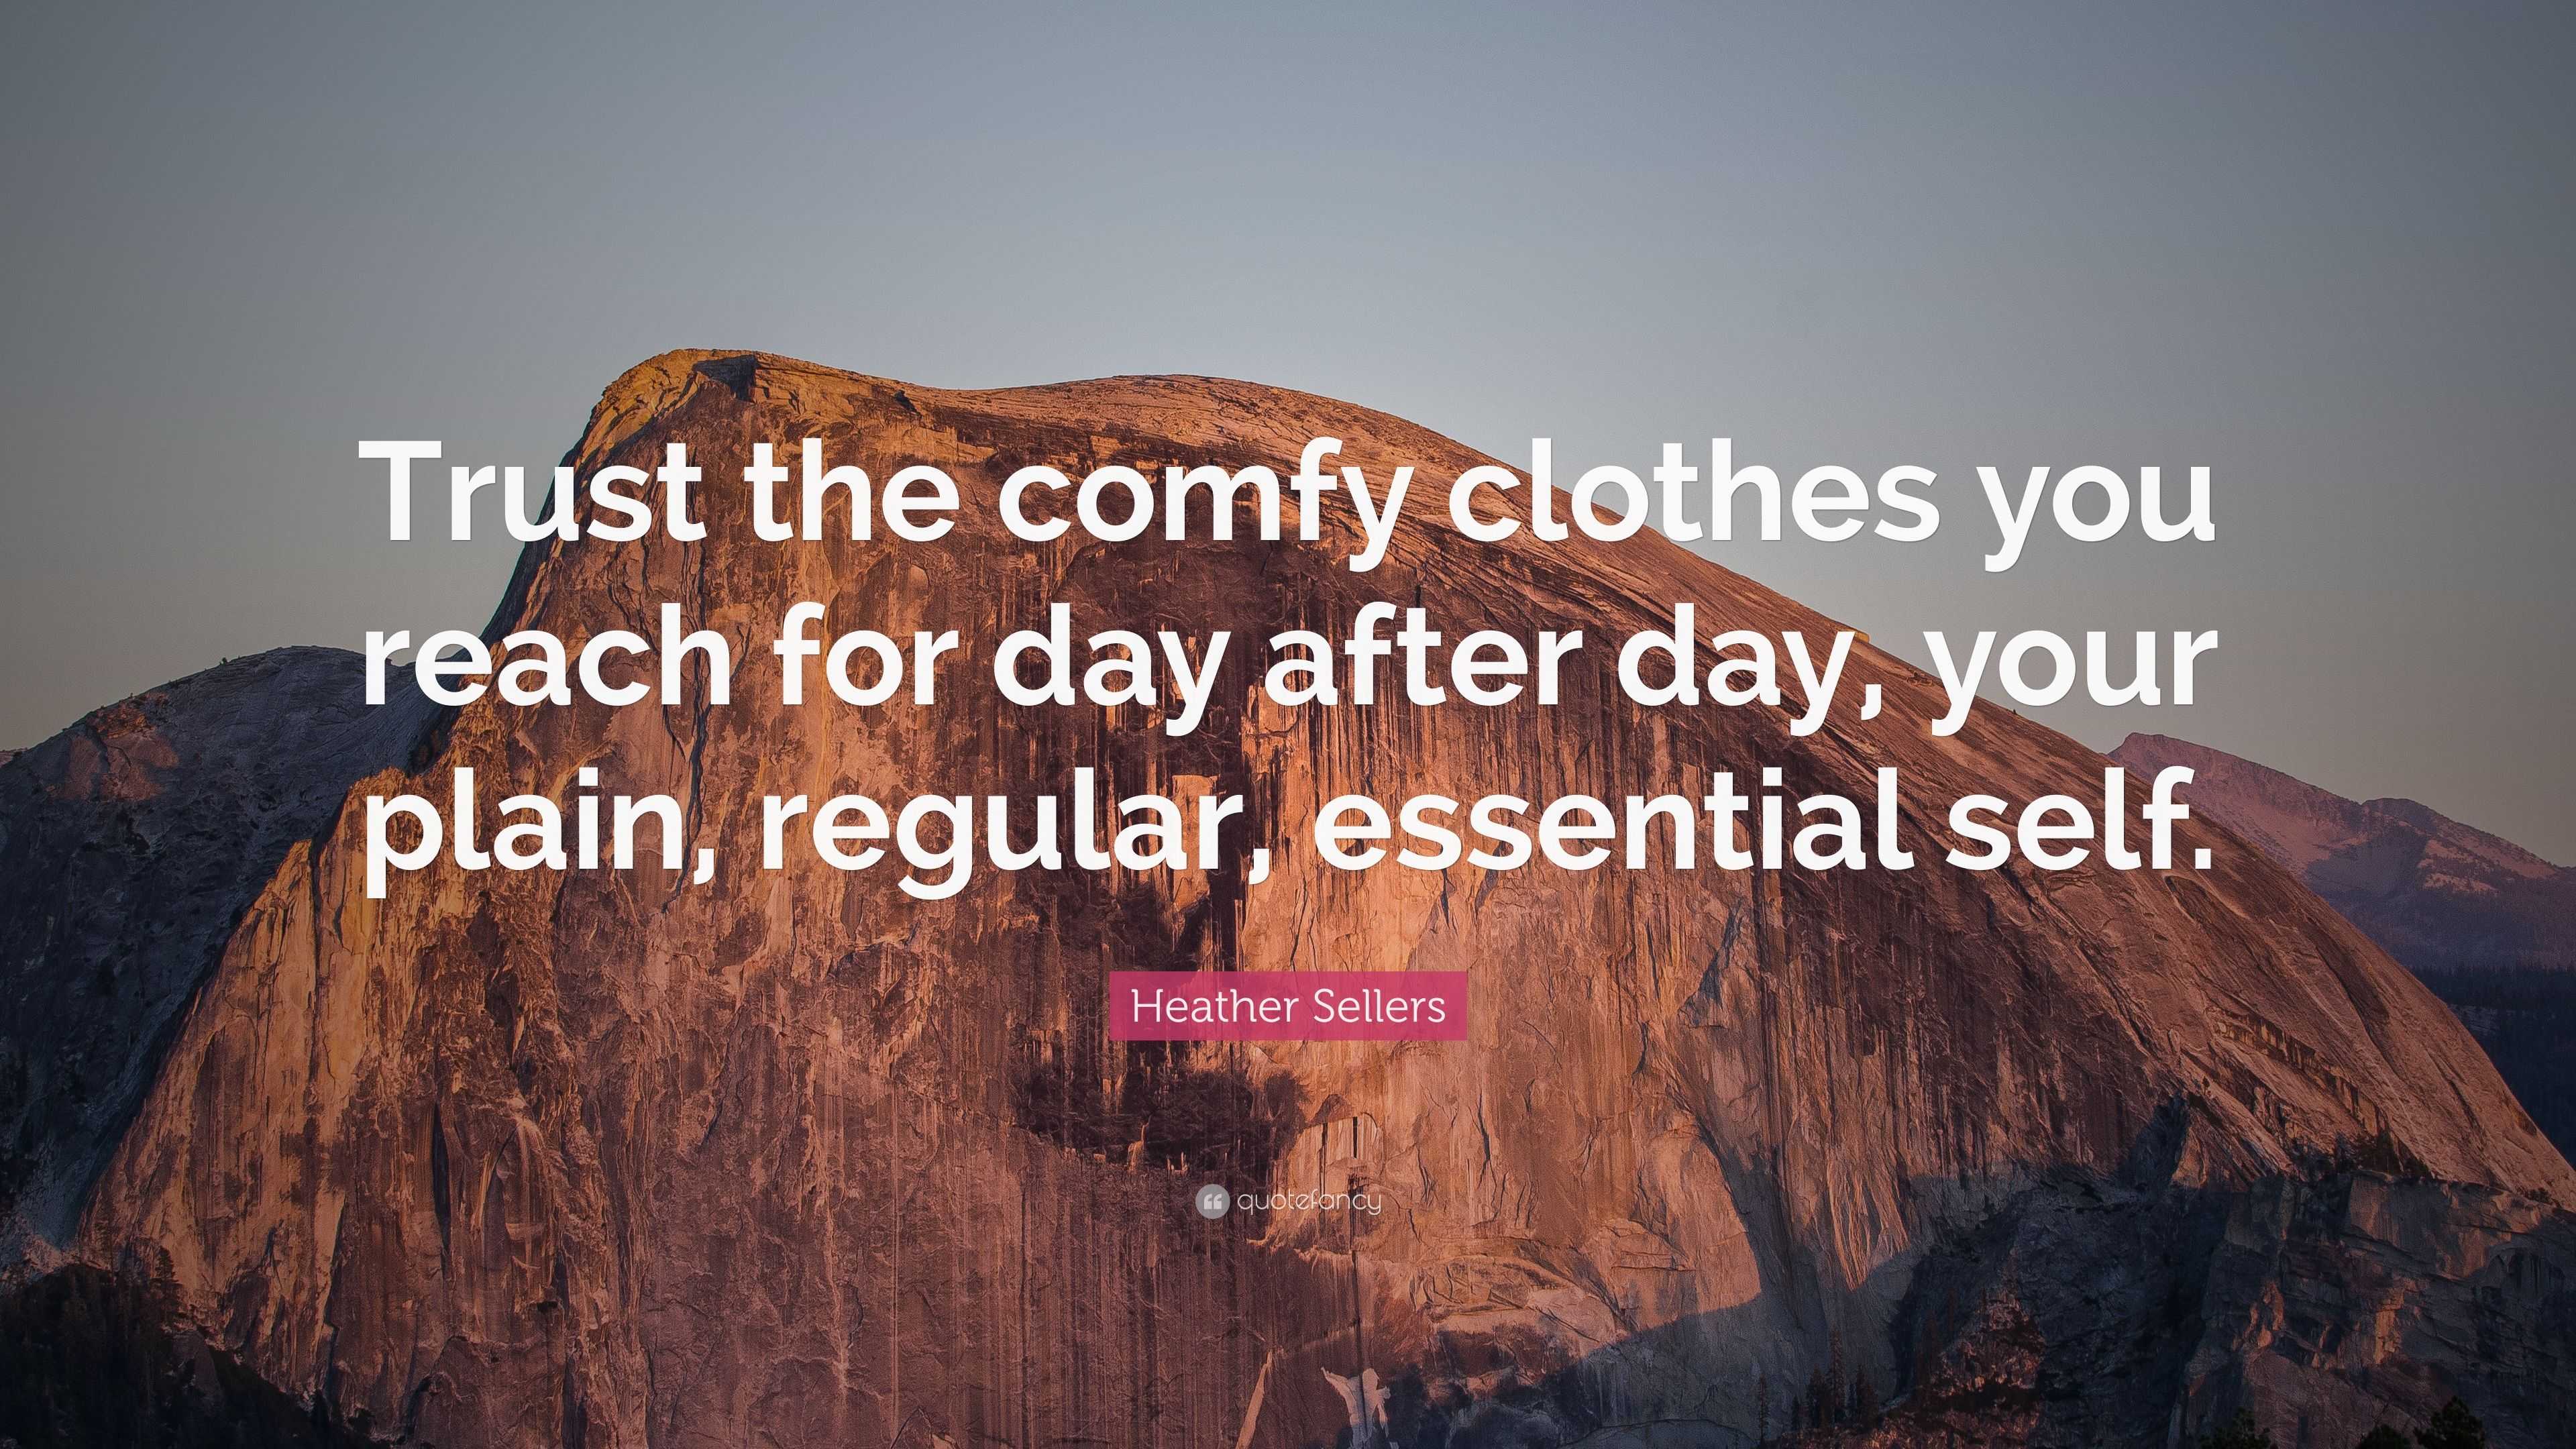 Heather Sellers Quote: “Trust the comfy clothes you reach for day after  day, your plain, regular